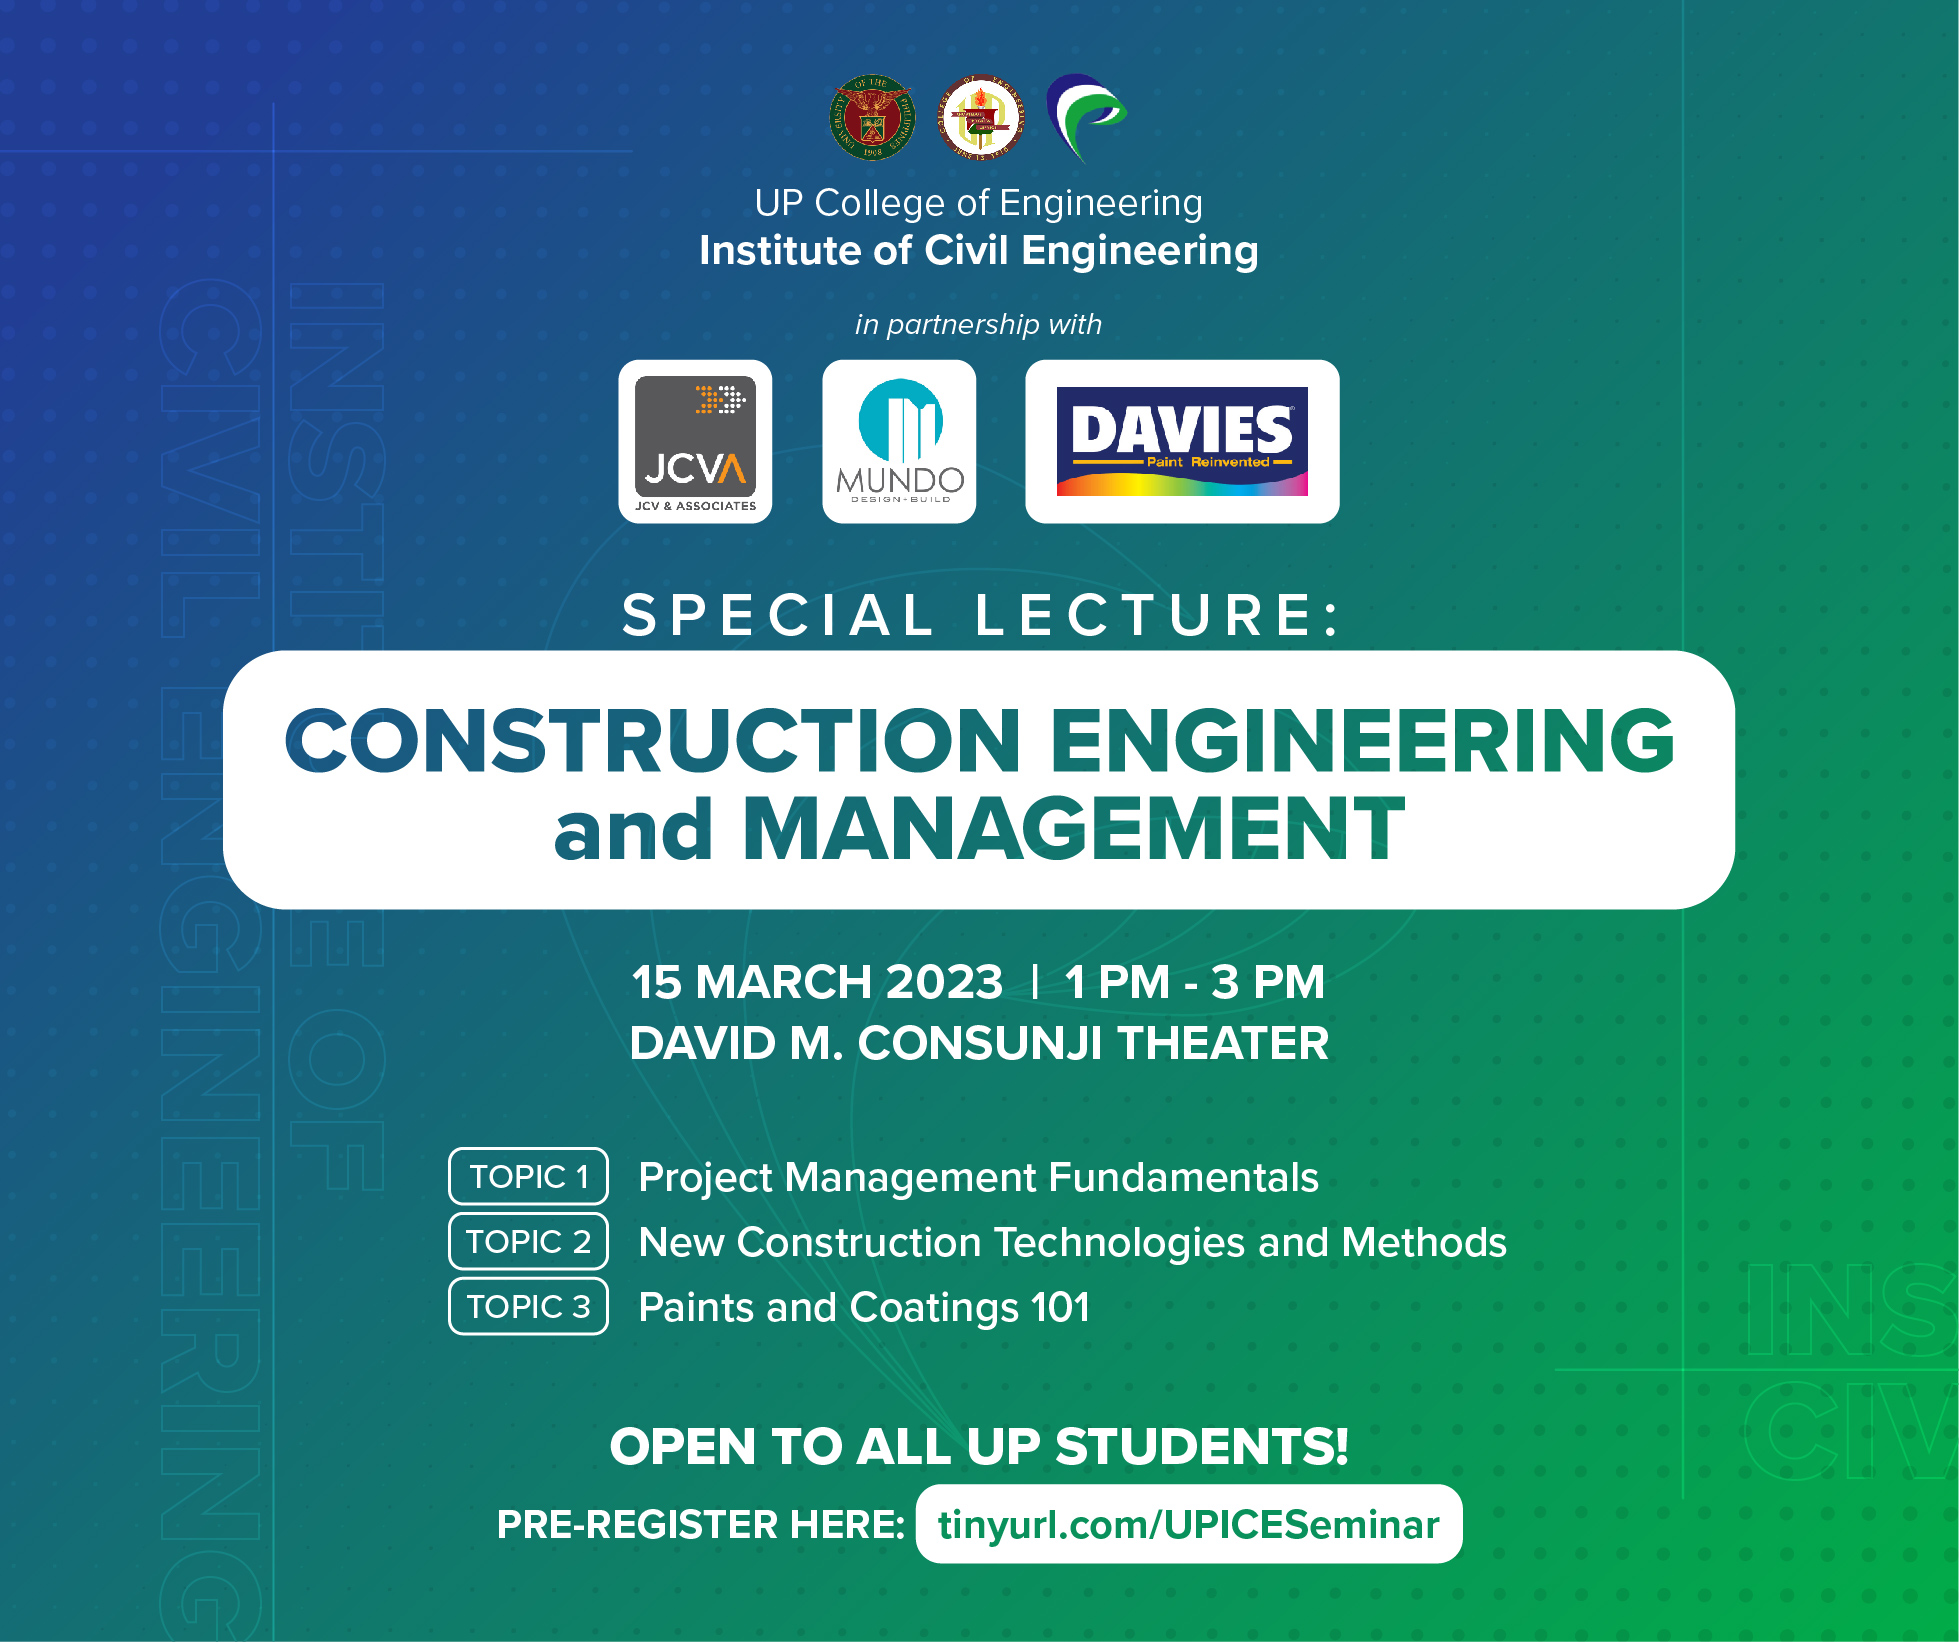 Special lecture on Construction Engineering and Management